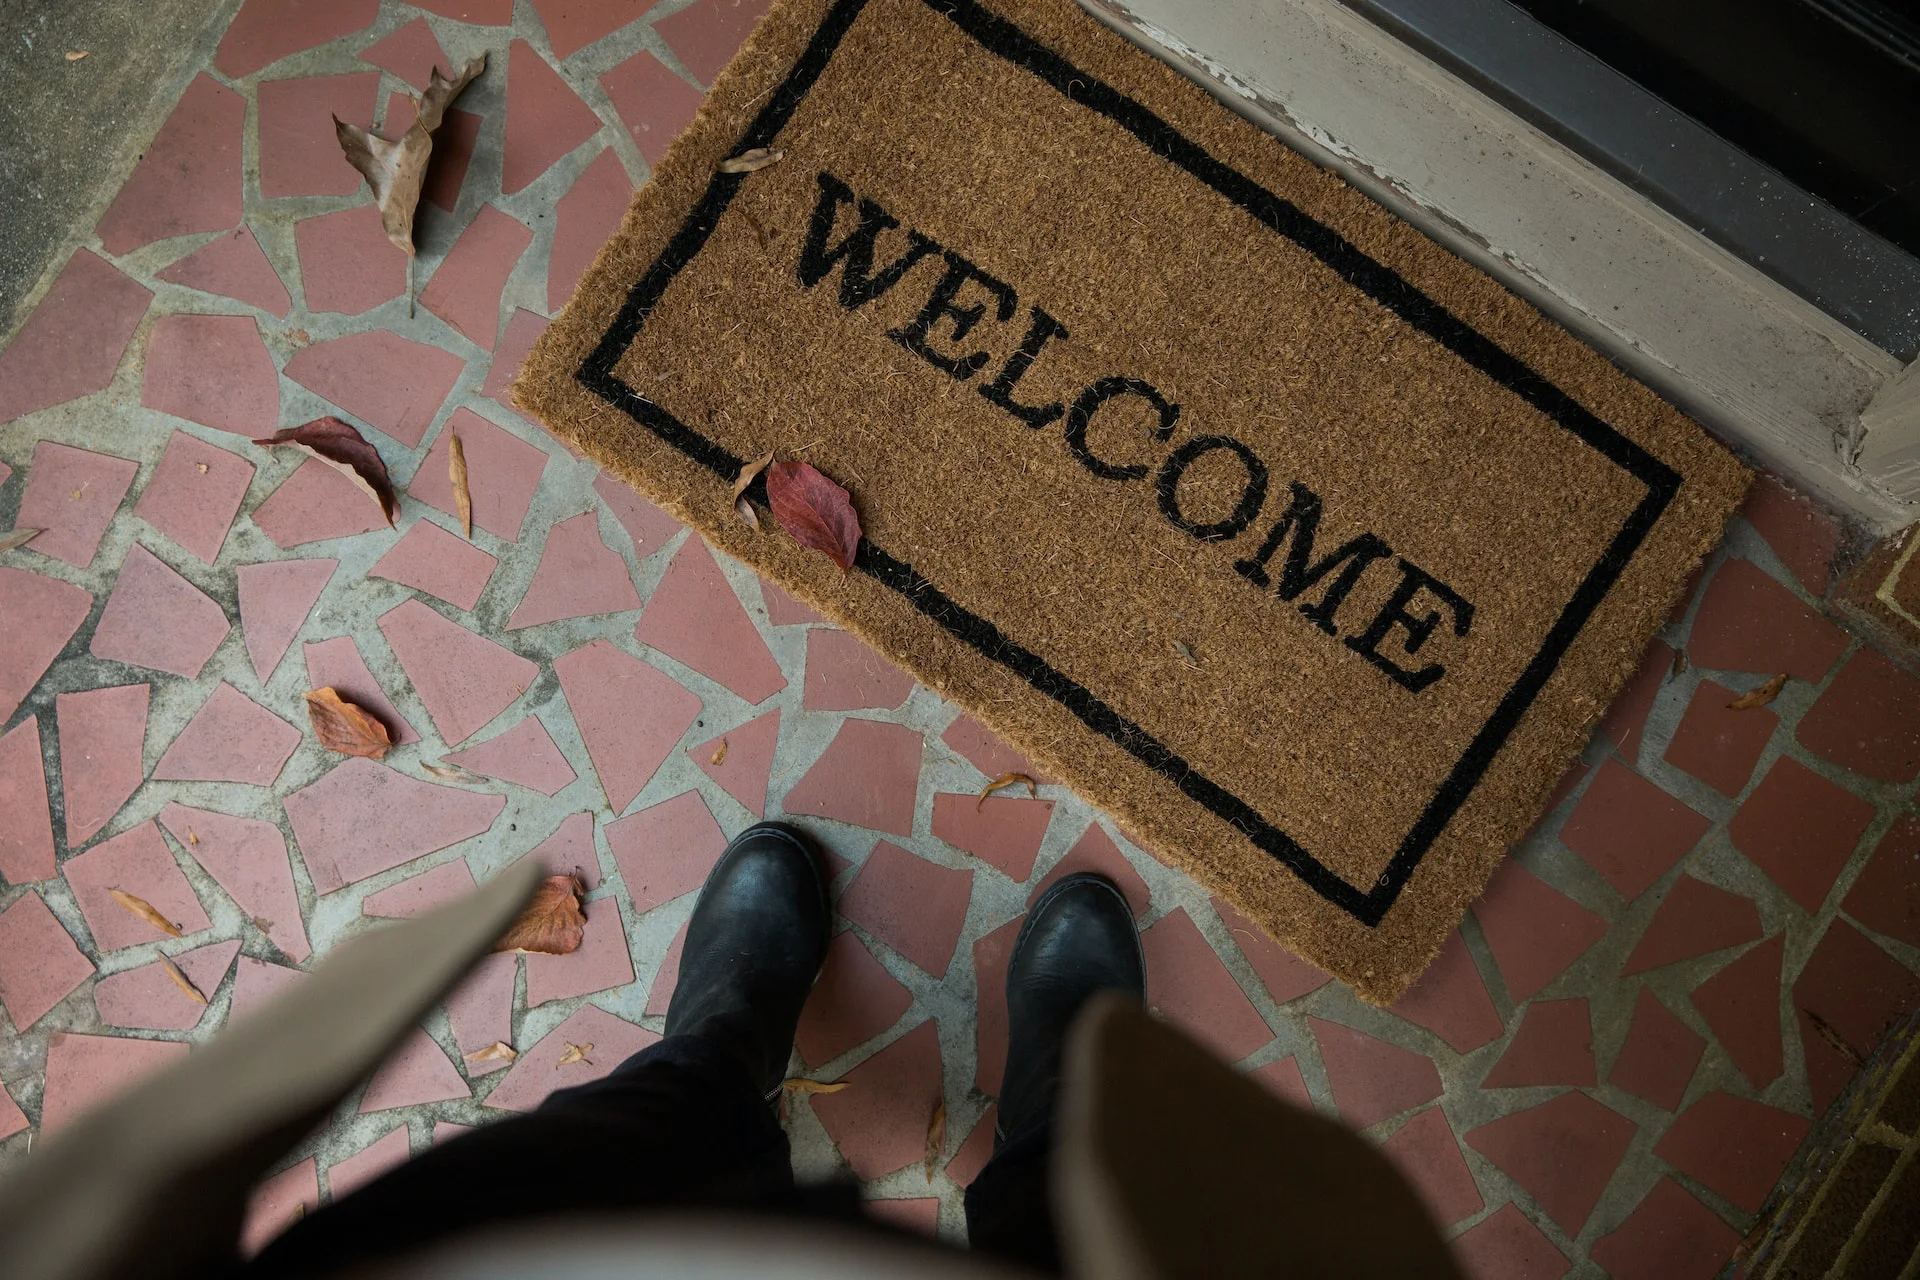 Top Five Things to Consider When Purchasing a New Doormat